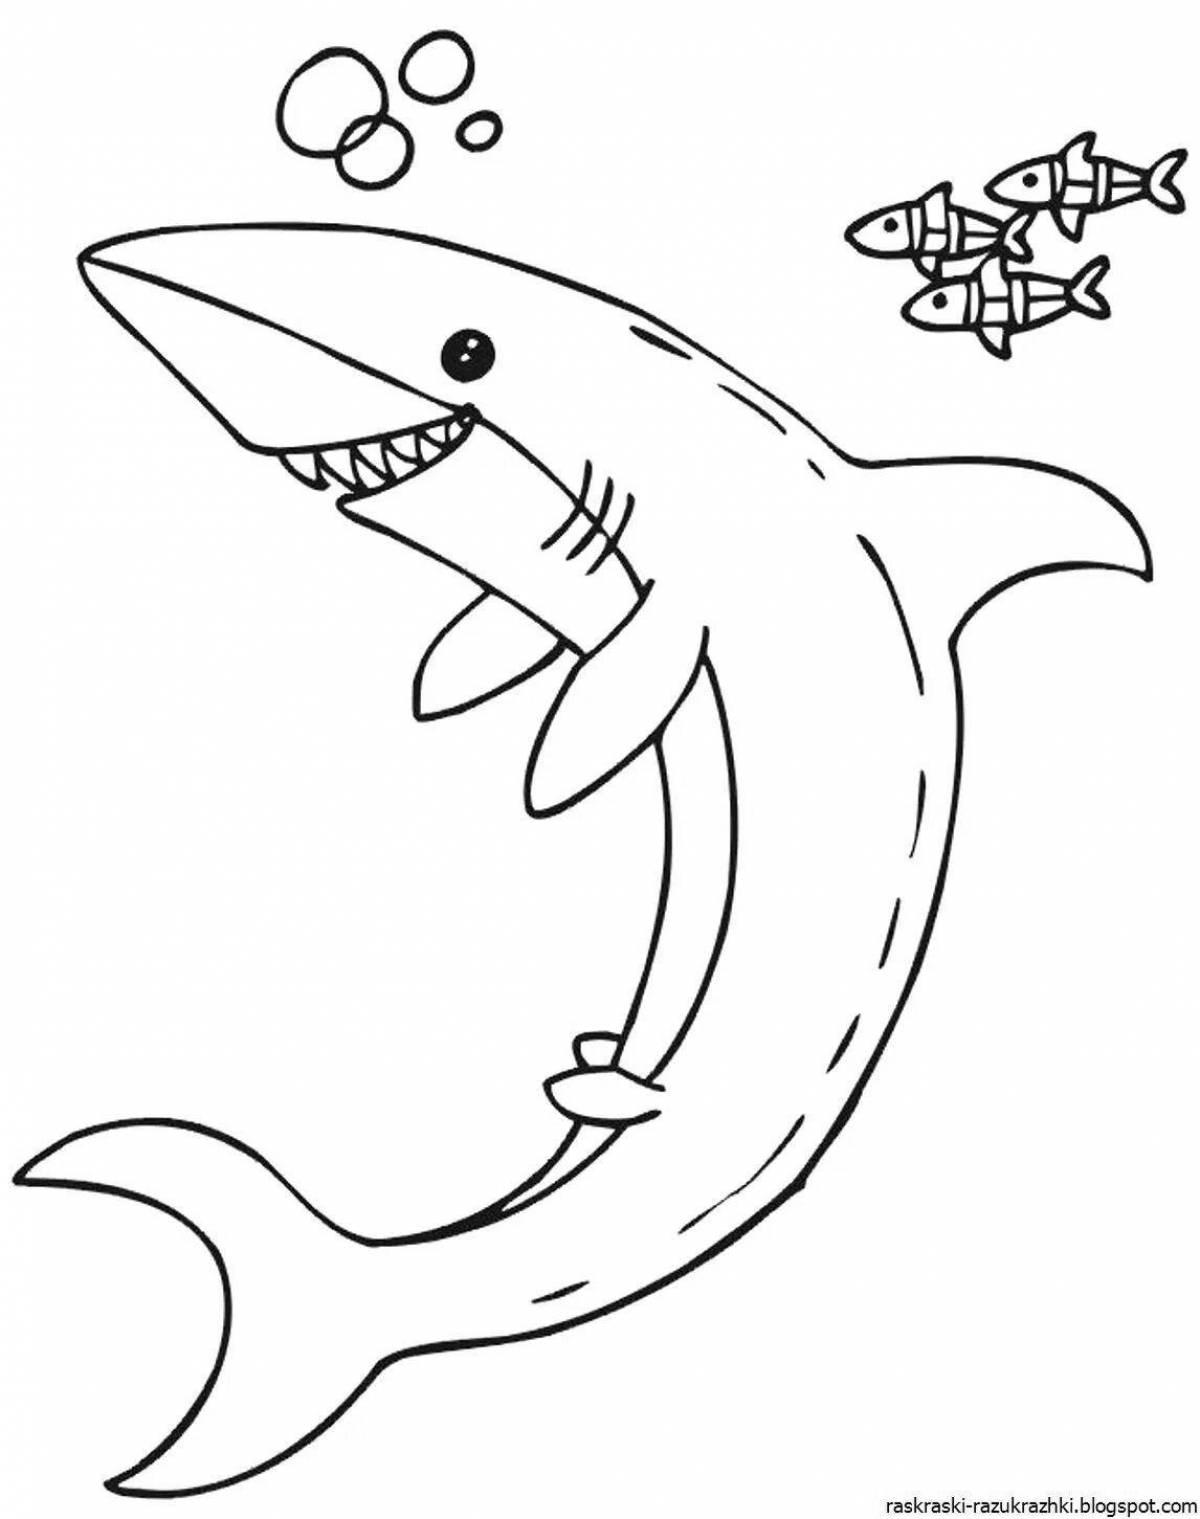 Colored explosive shark coloring book for kids